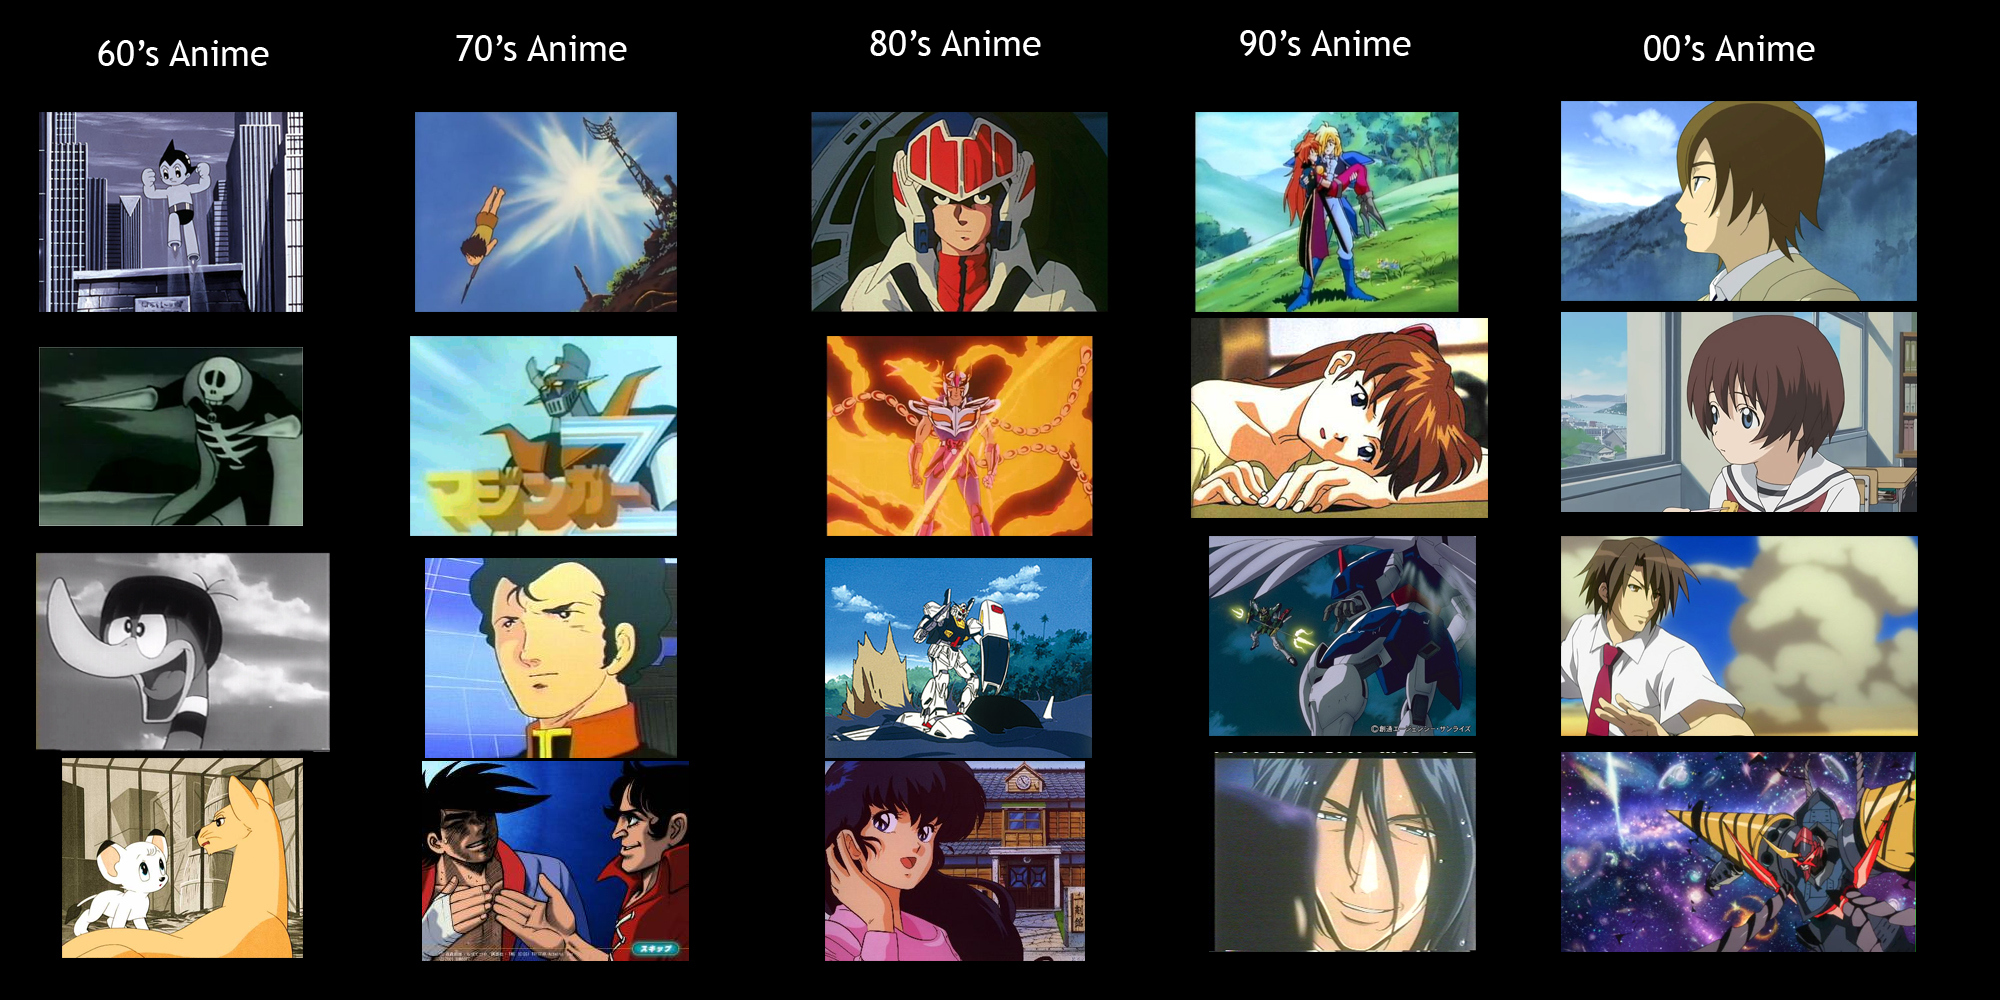 10 Rated R Insanely Brutal Anime From 80s and 90s The Golden Era   YouTube